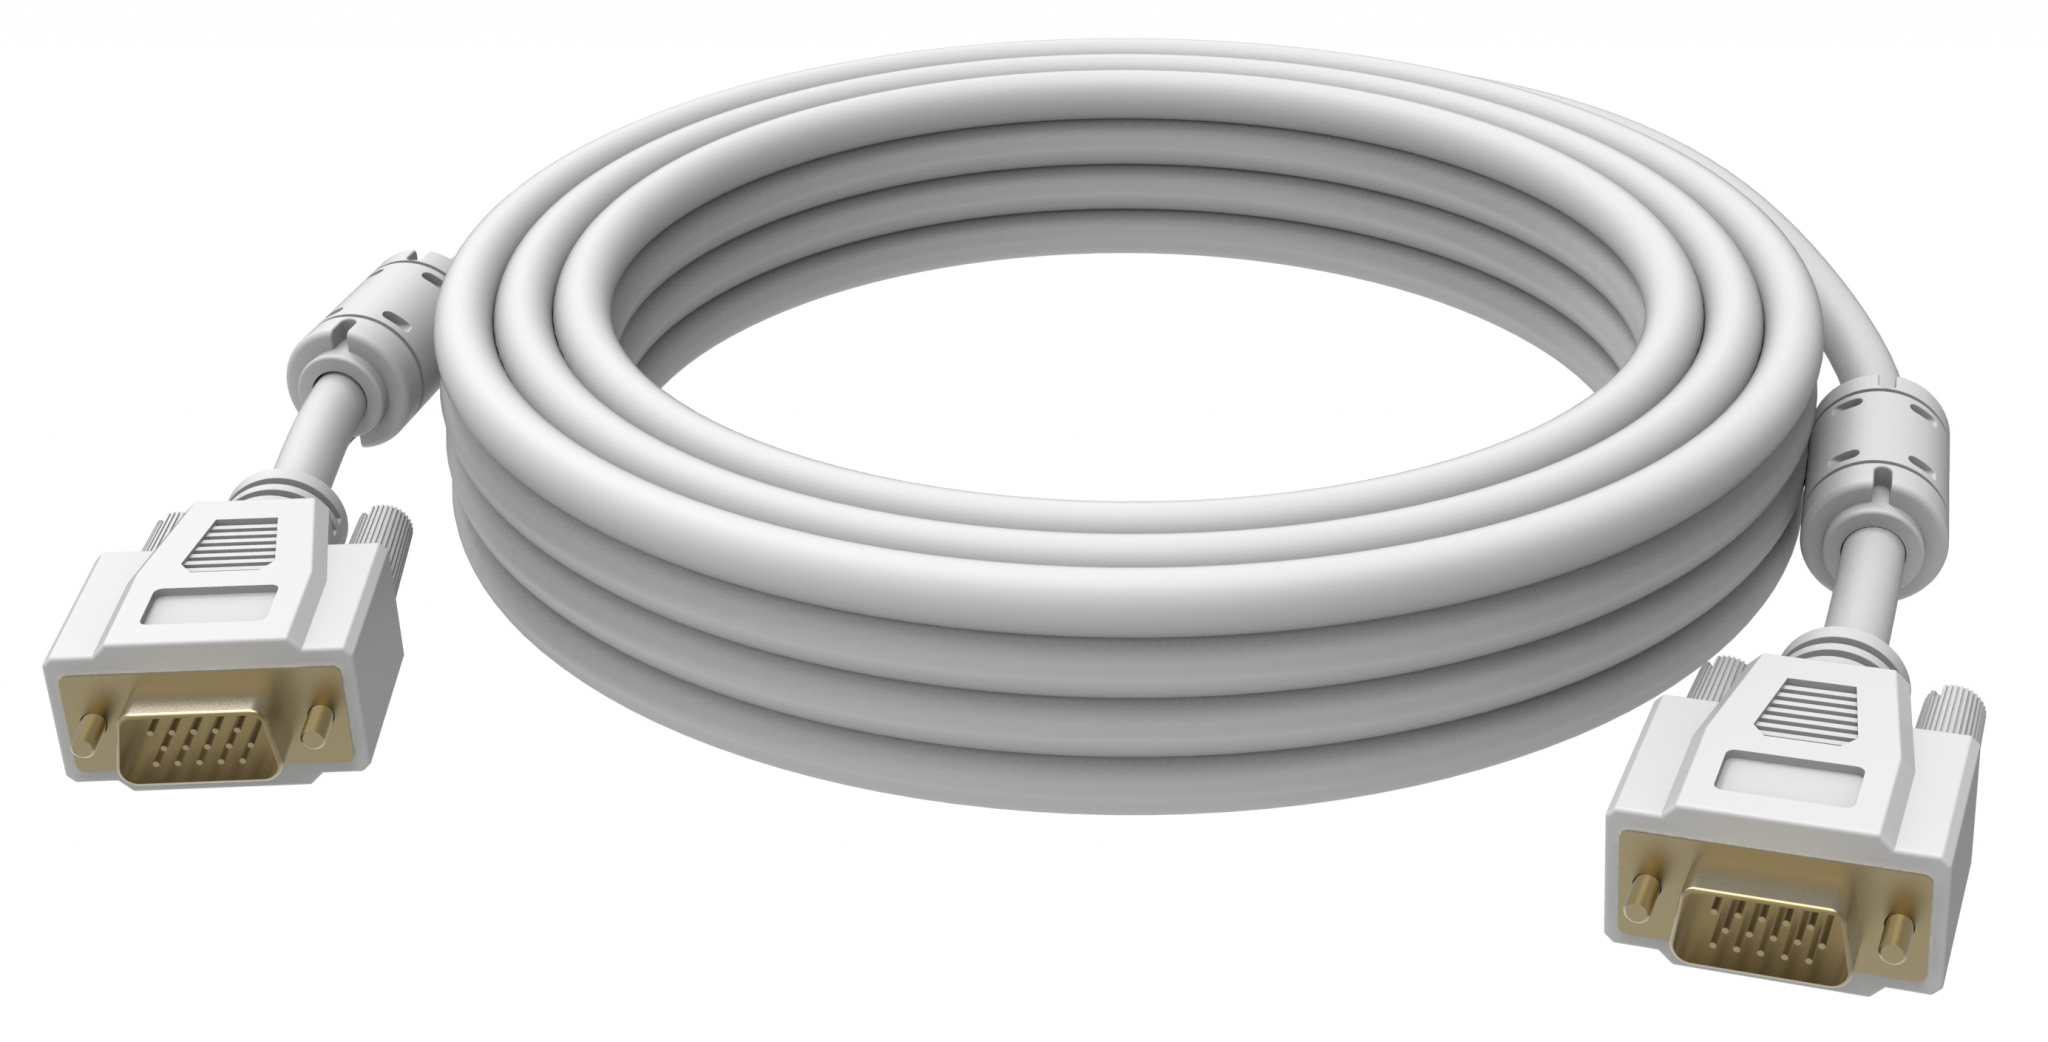 An image showing Cable blanco tipo VGA de 5 m (16 pies)